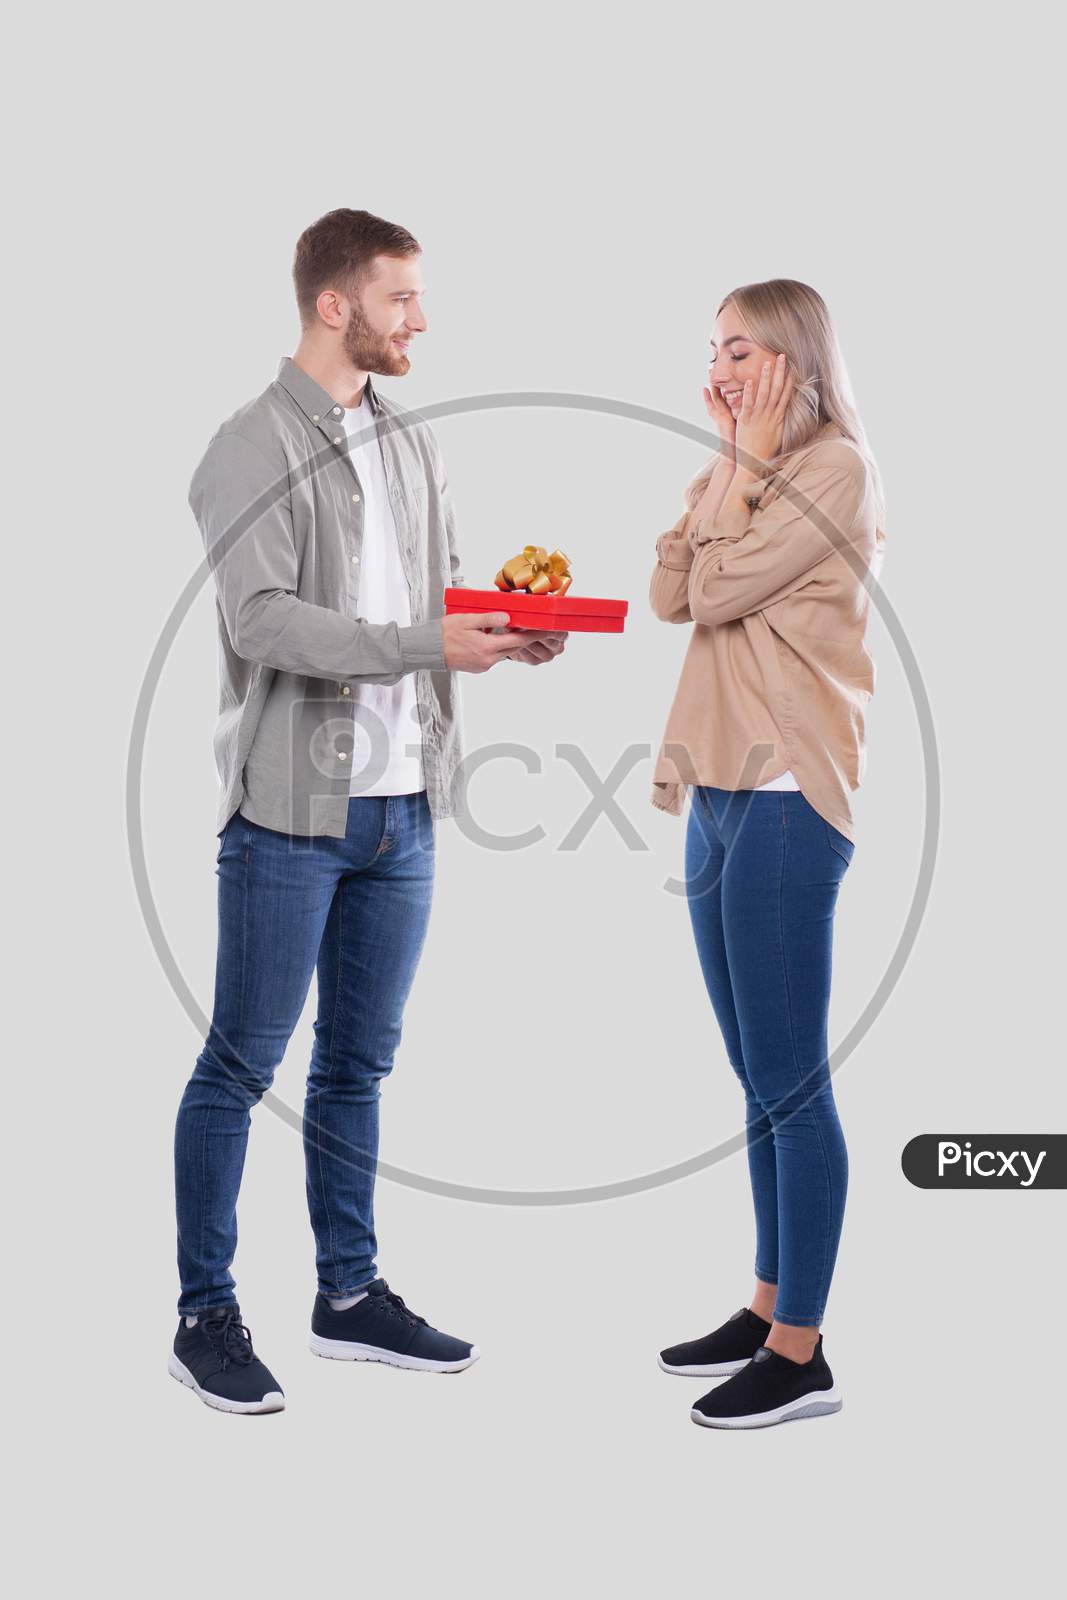 Couple Standing Isolated. Woman Suprised By Gift From Man. Man Making A Gift To Girl. Couple Day. Present For Girl